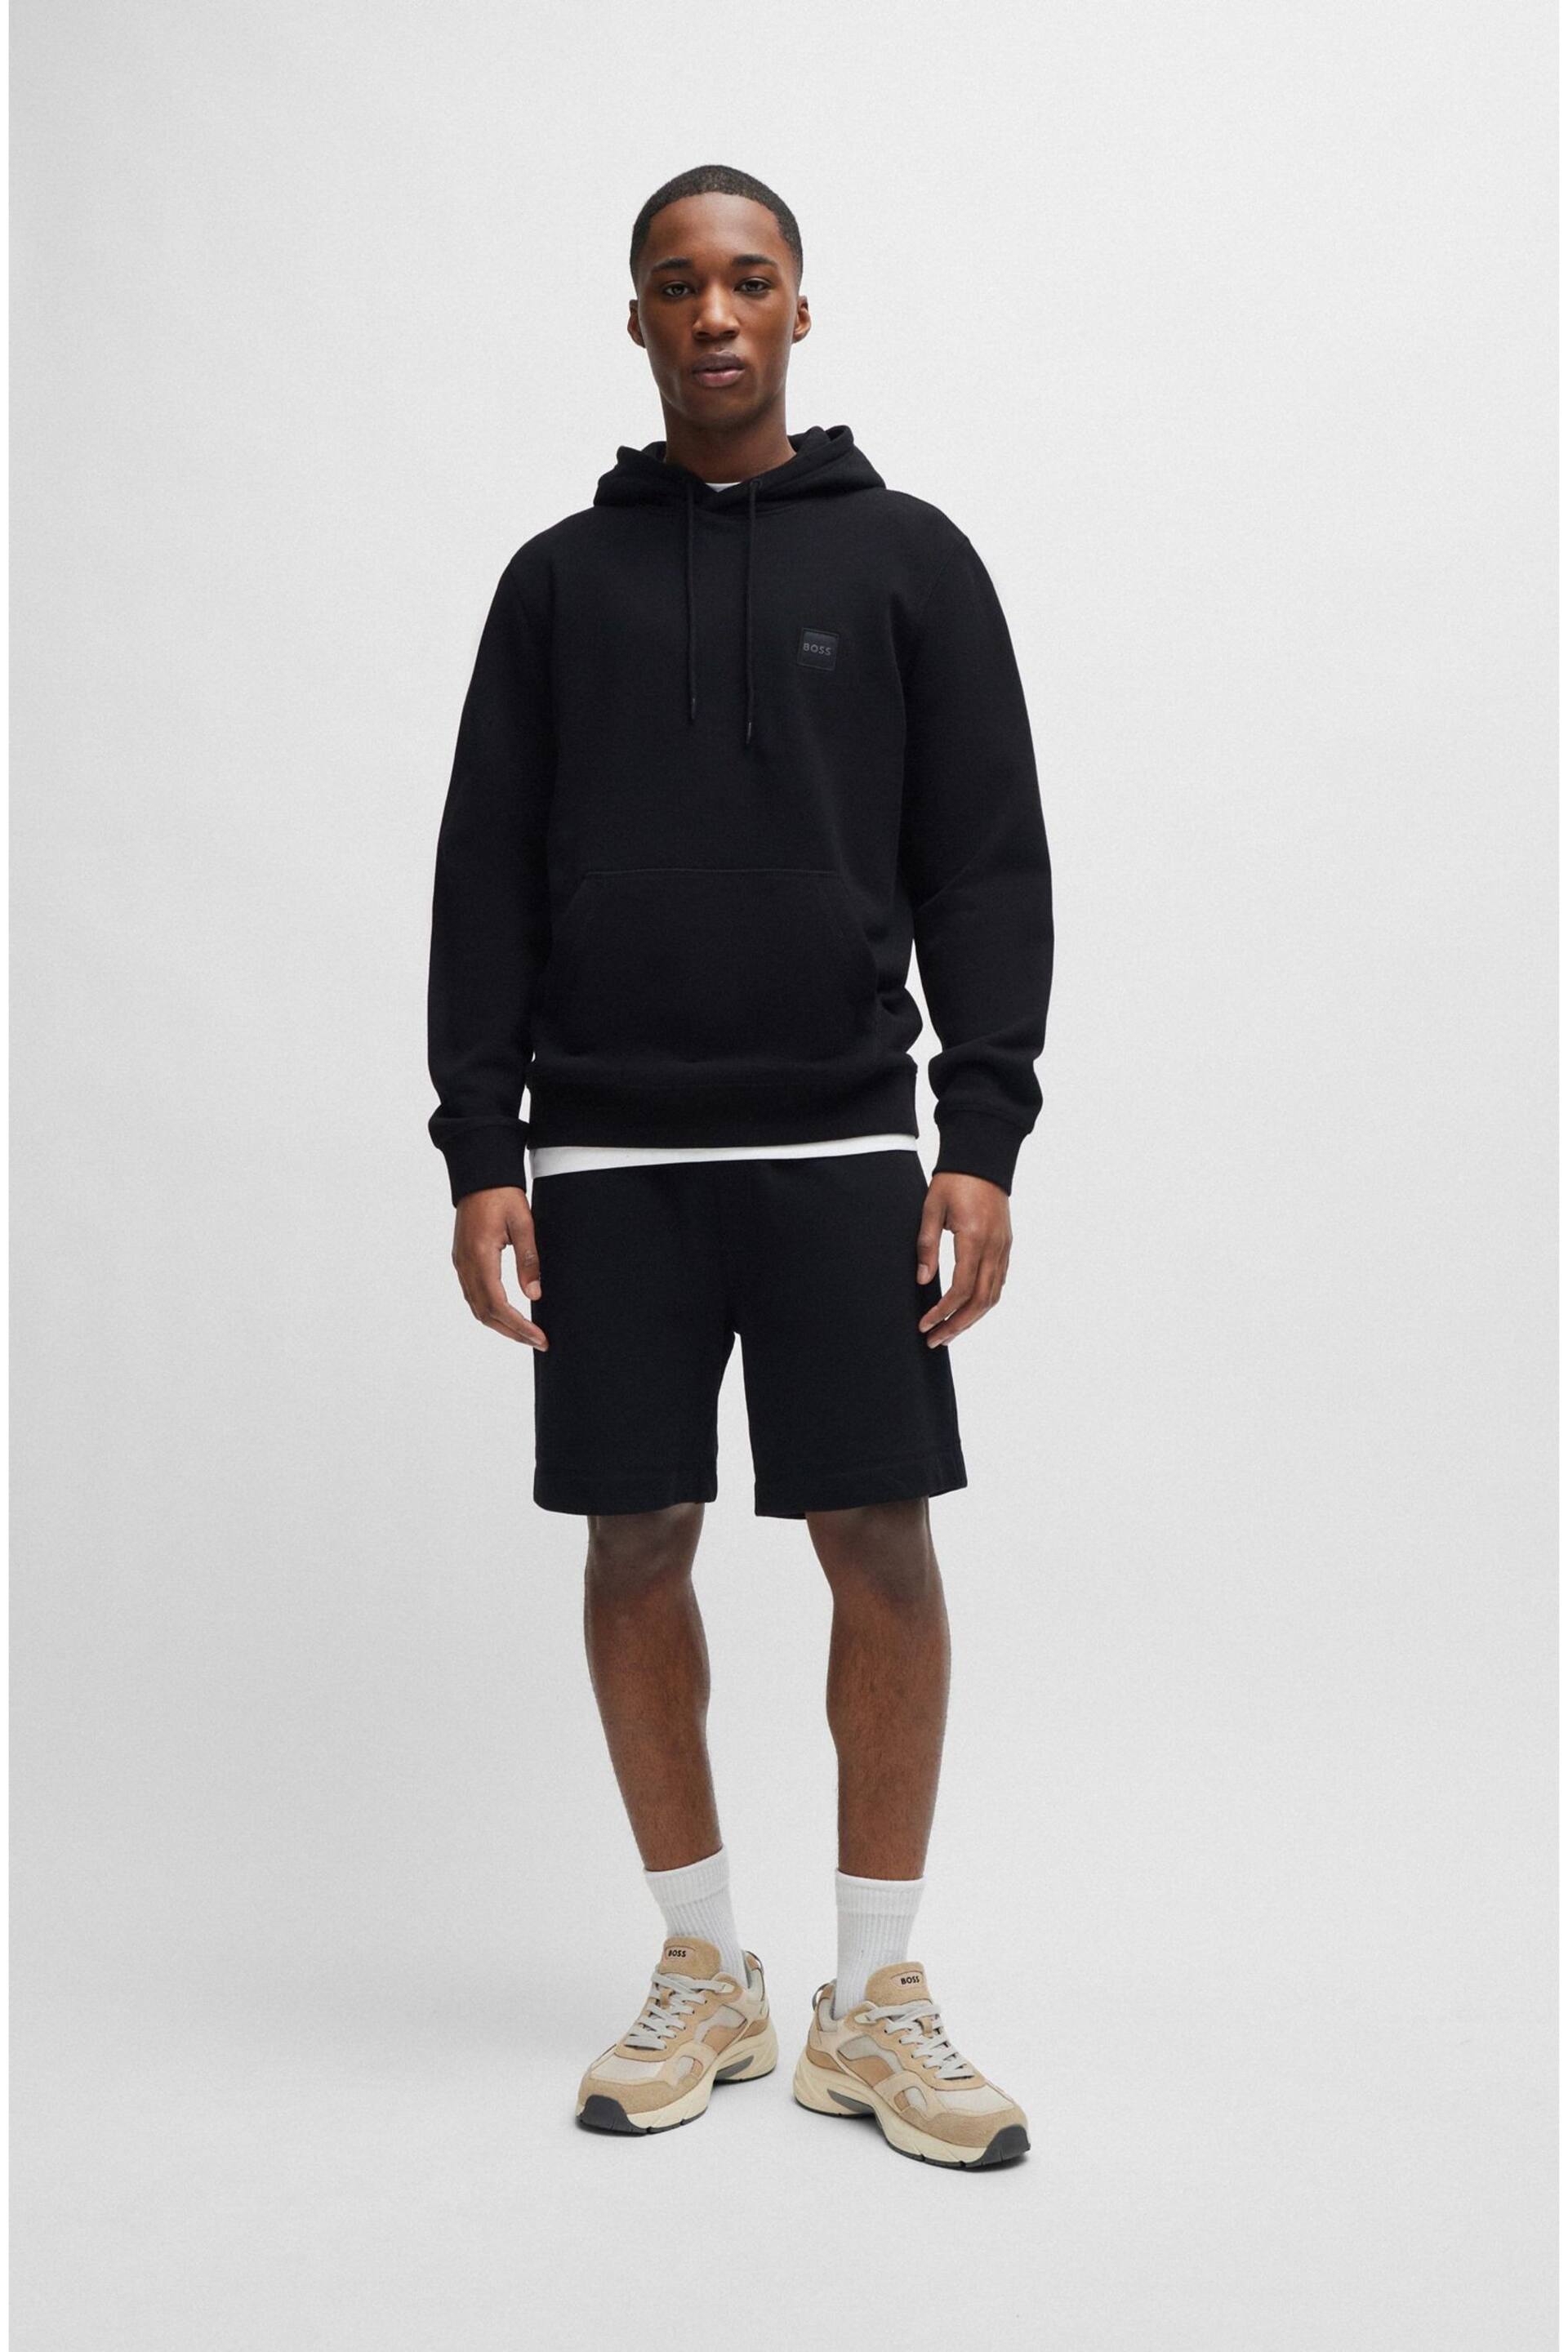 BOSS Black Logo-Patch Hoodie In Cotton Terry - Image 3 of 5